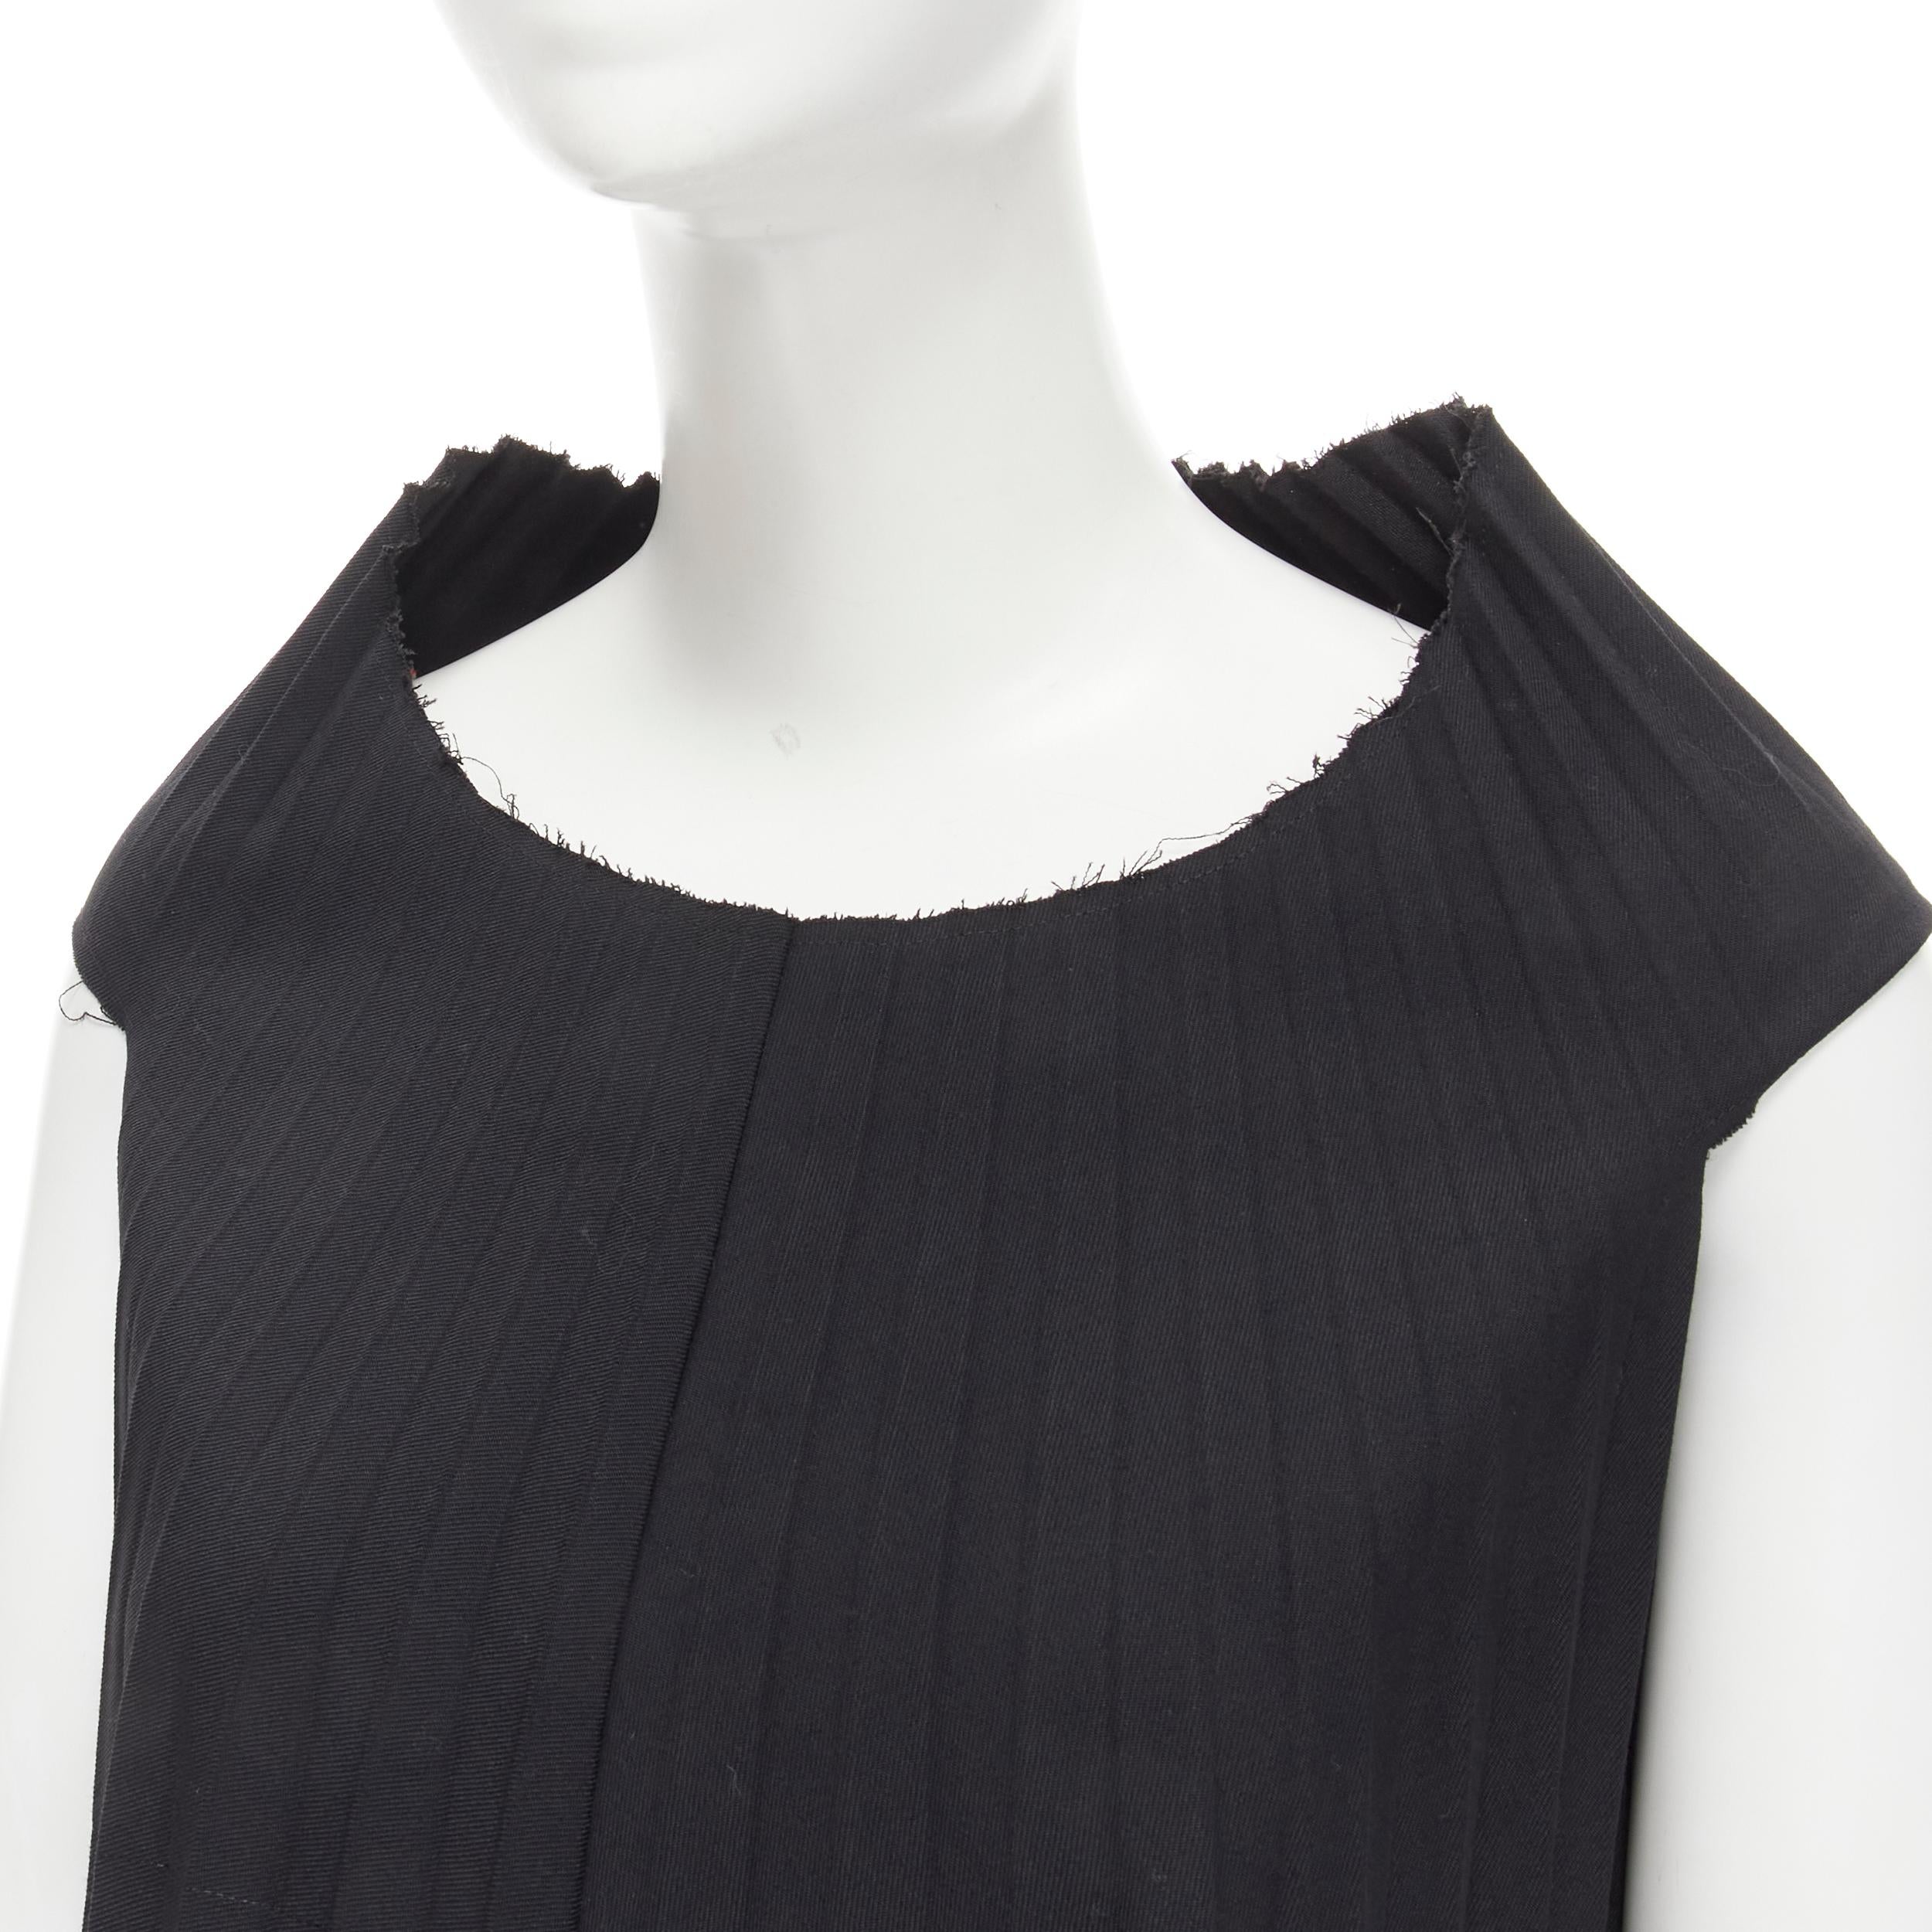 JUNYA WATANABE 1998 black Accordion pleated raw edge deconstructed dress S 
Reference: CRTI/A00498 
Brand: Junya Watanabe 
Collection: 1998 
Material: Cotton 
Color: Black 
Pattern: Solid 
Extra Detail: Rounded shoulder collar. Raw seam hem. Frayed